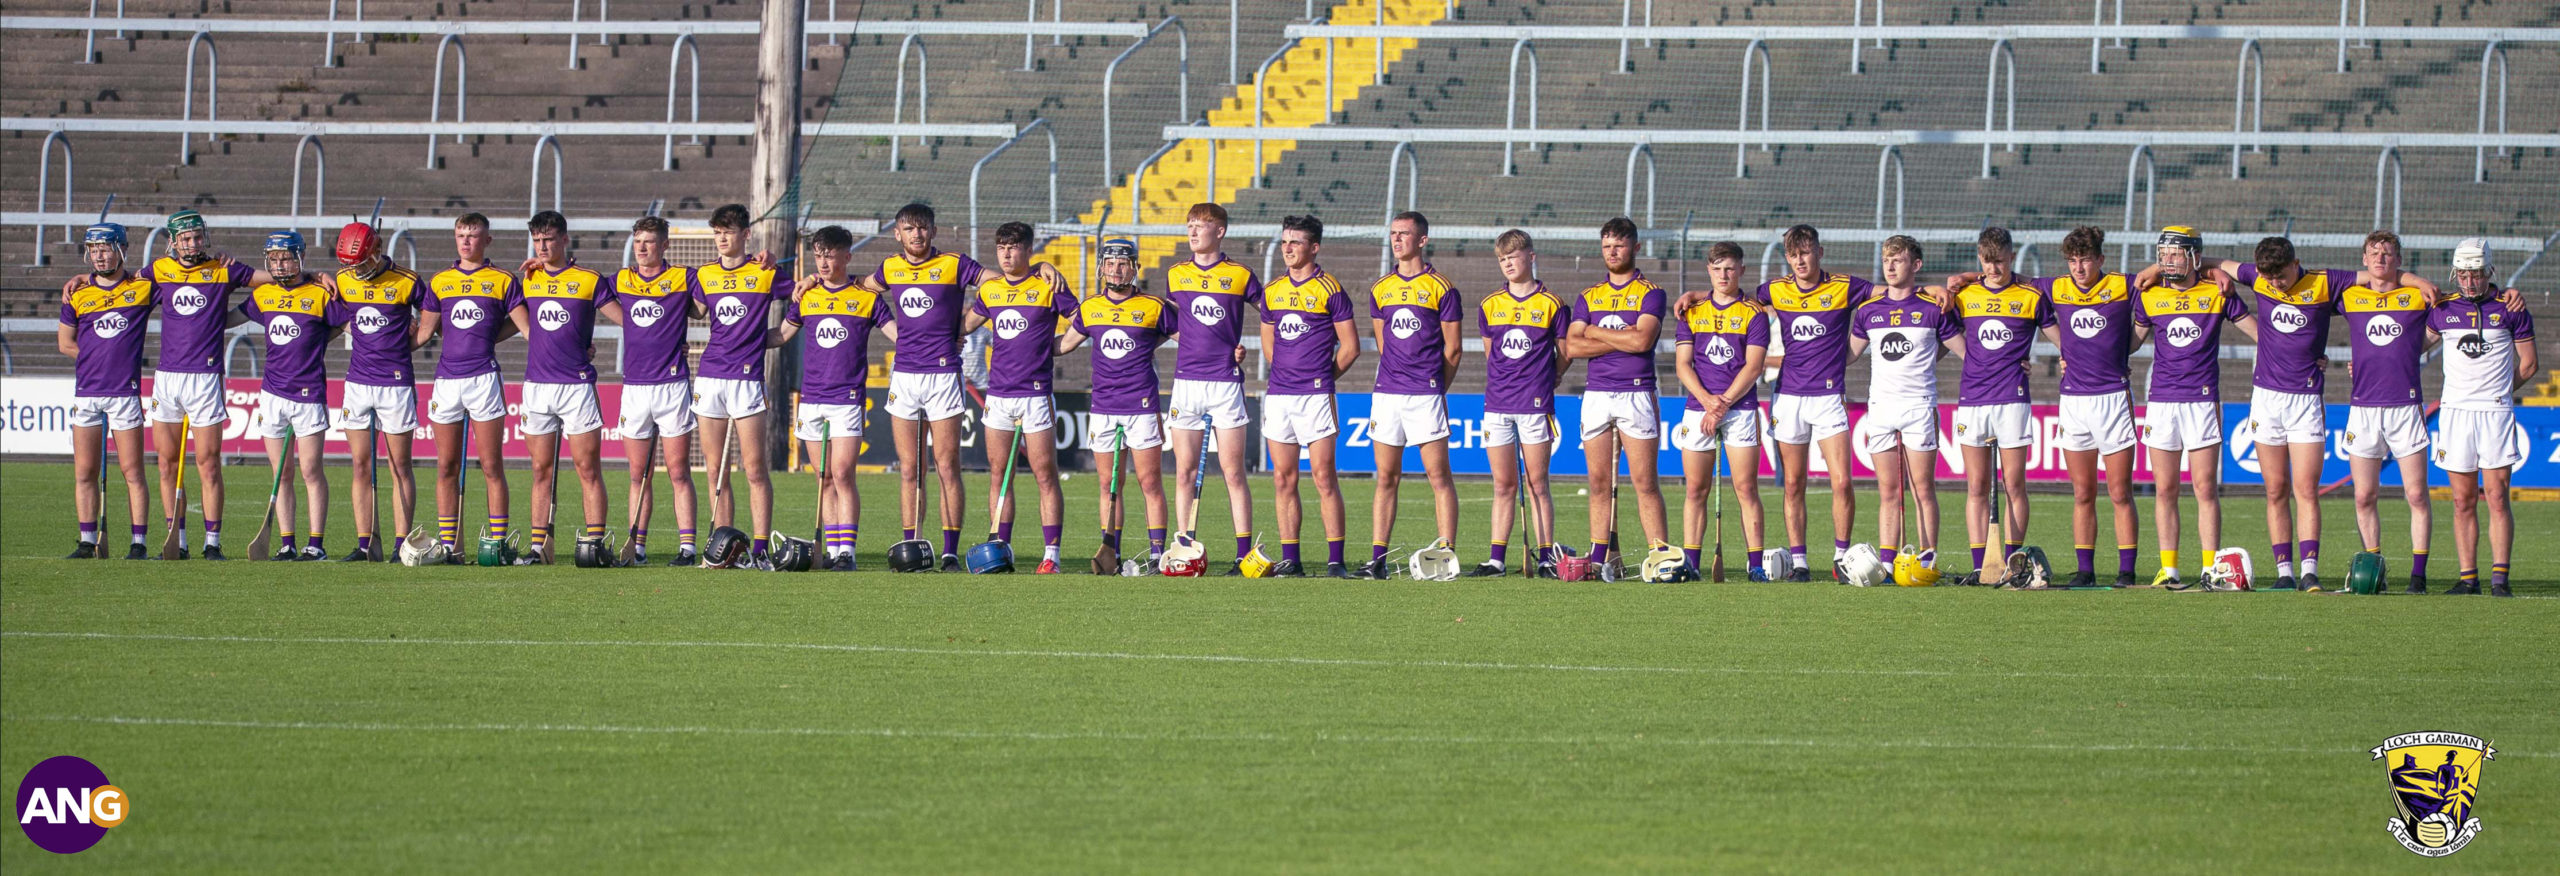 Wexford Minor Hurlers make it through to Leinster Final after impressive win over Dublin